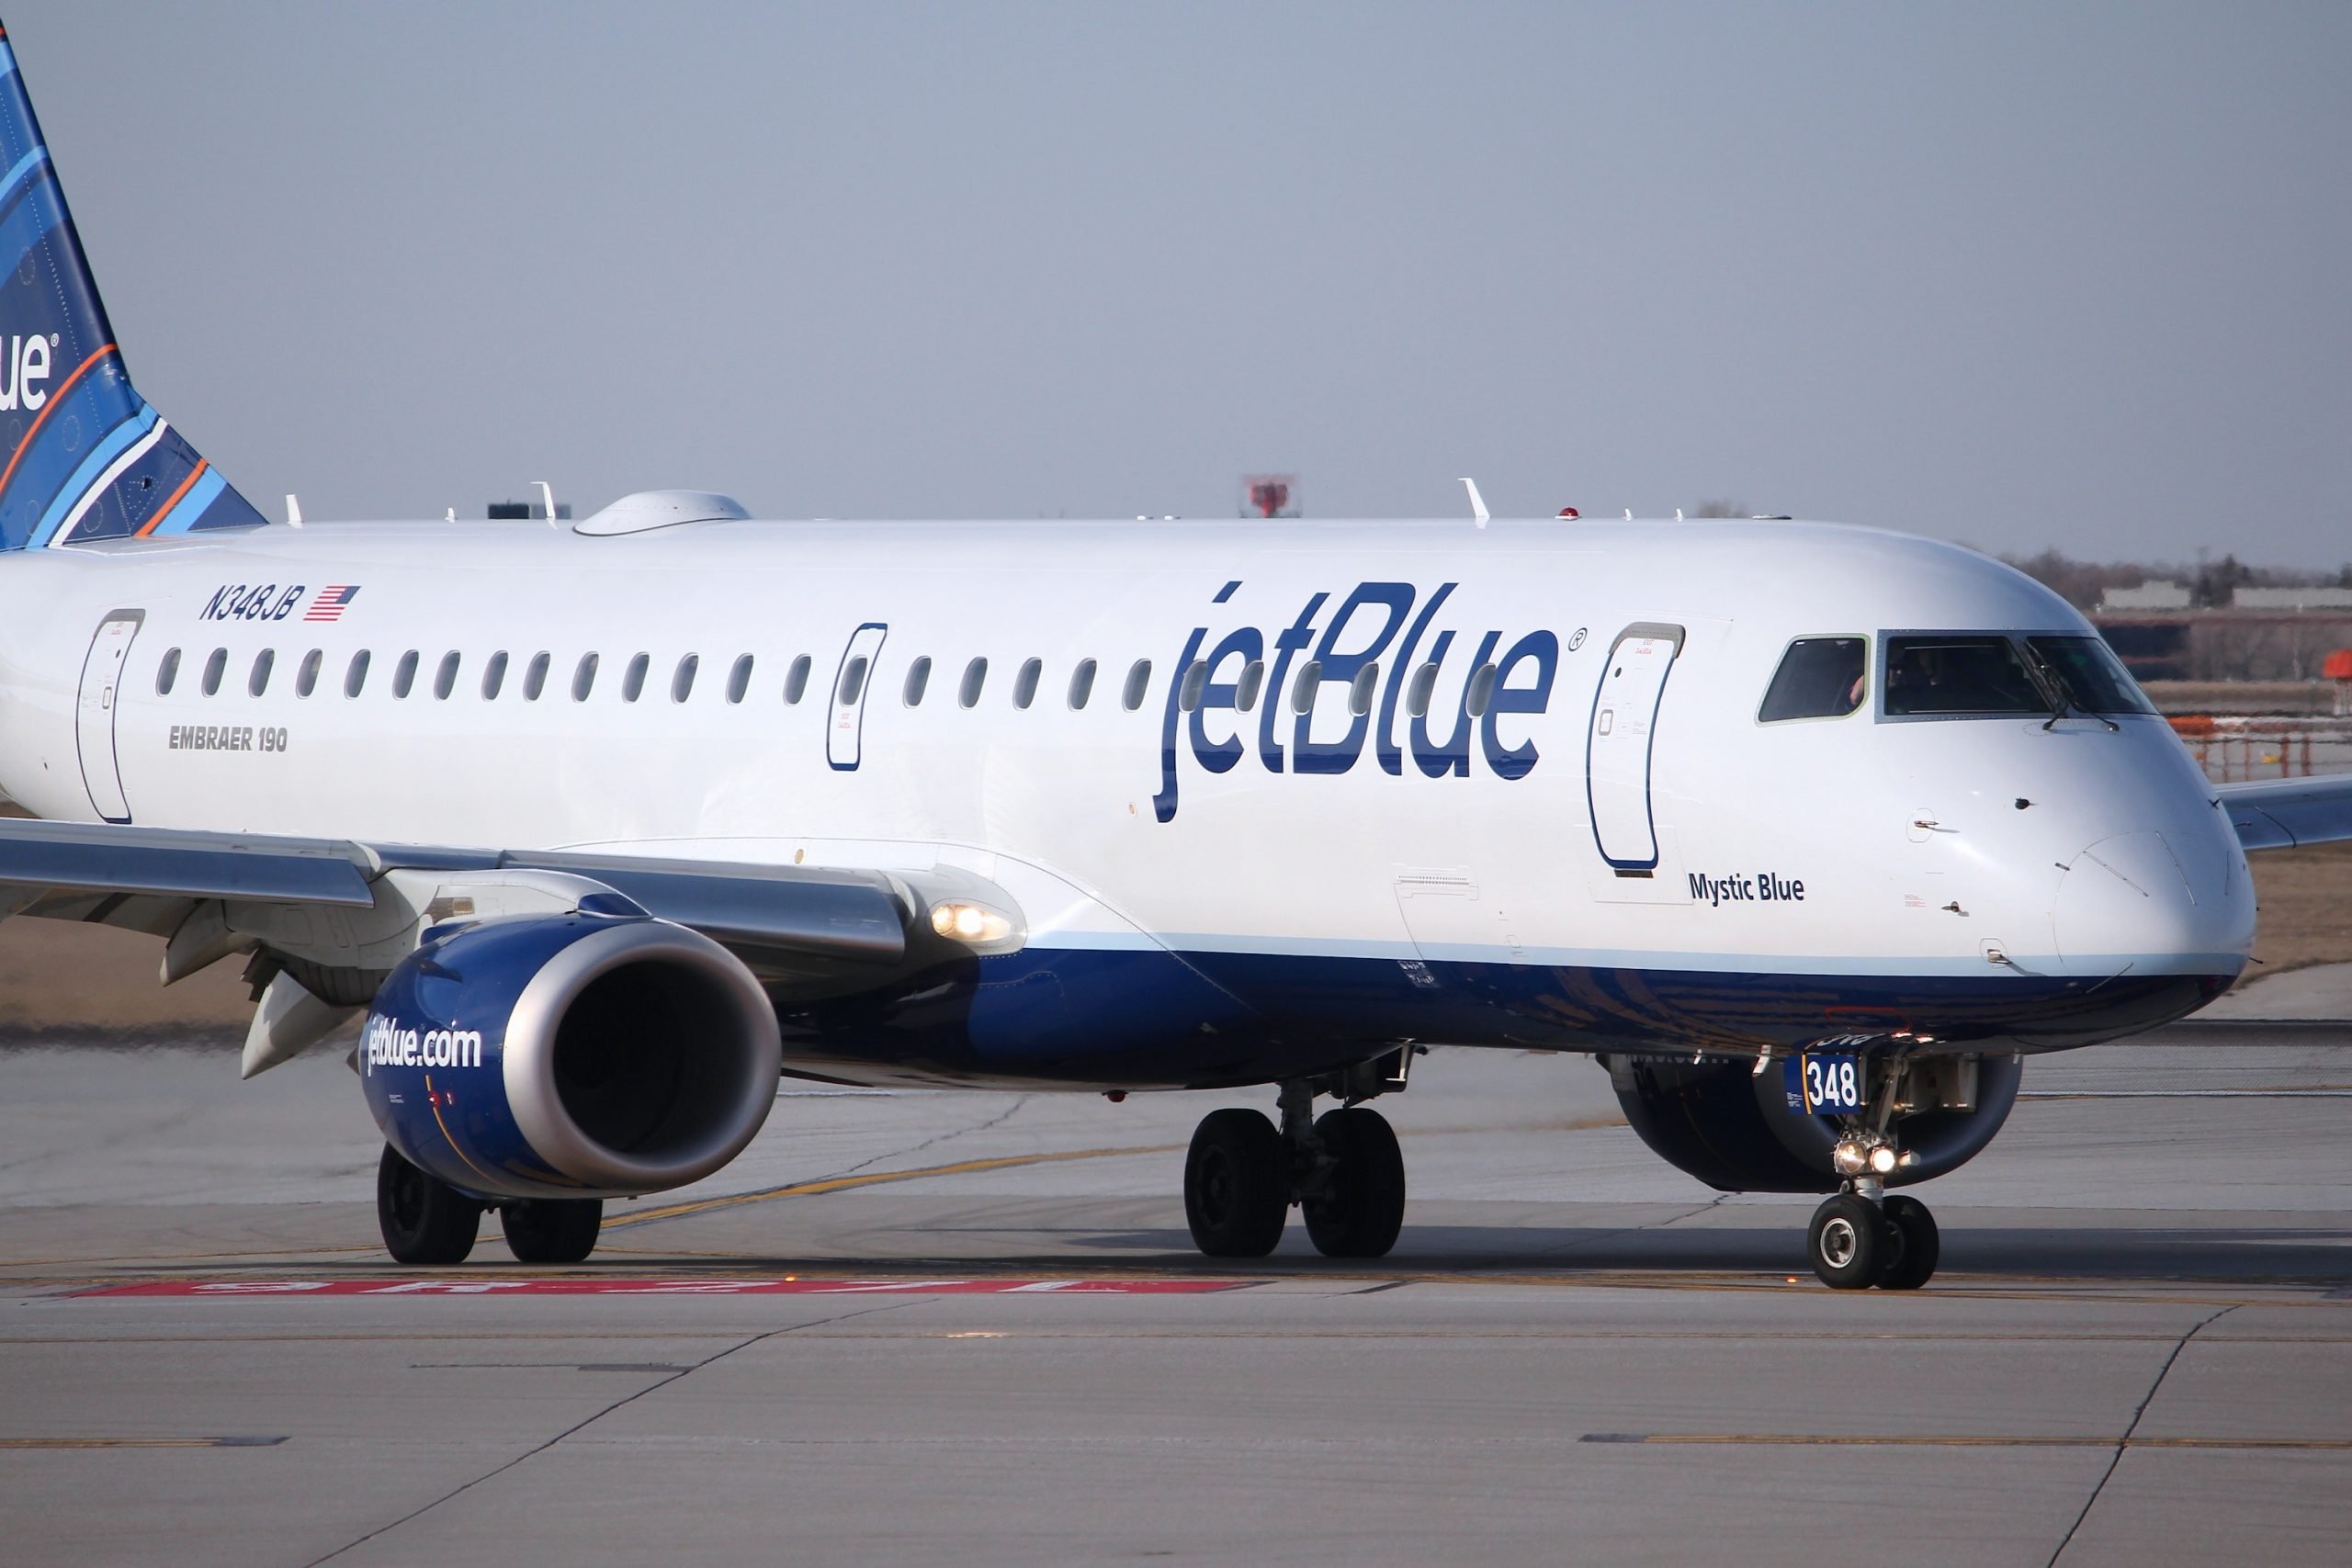 CHICAGO, UNITED STATES - APRIL 1, 2014: Jetblue Embraer taxies after landing at O'Hare Airport in Chicago. JetBlue is an American low-cost airline with 5.4 bn USD revenue in 2013.